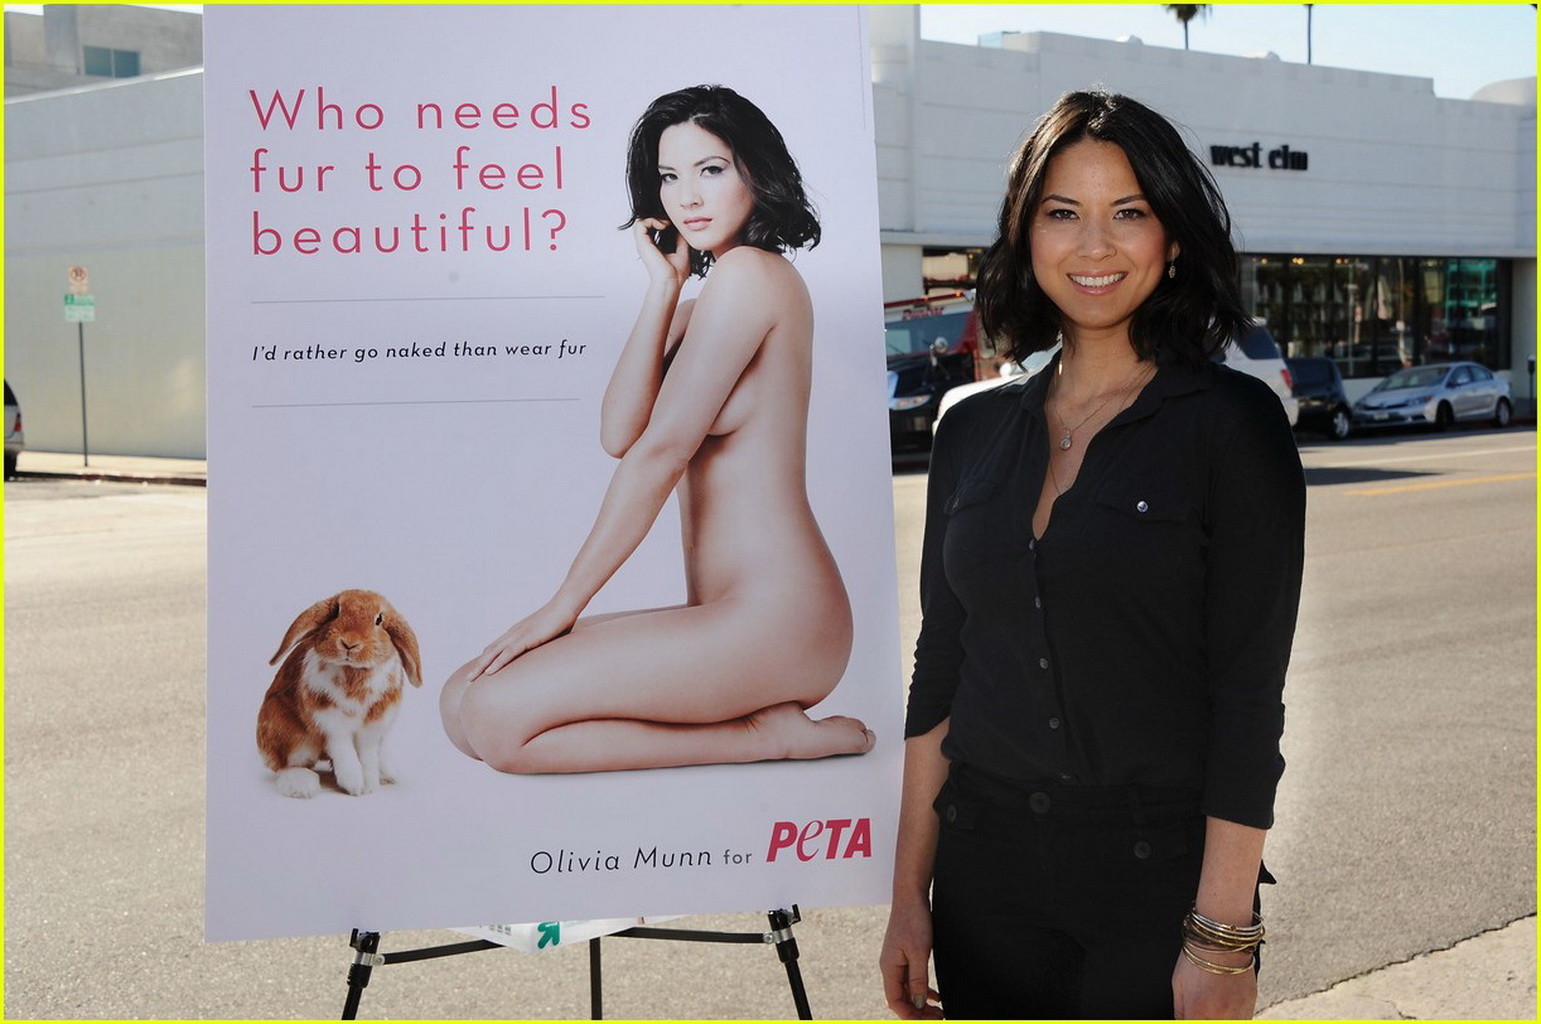 Olivia Munn fully nude but hiding for the new PETA ad campaign #75276623